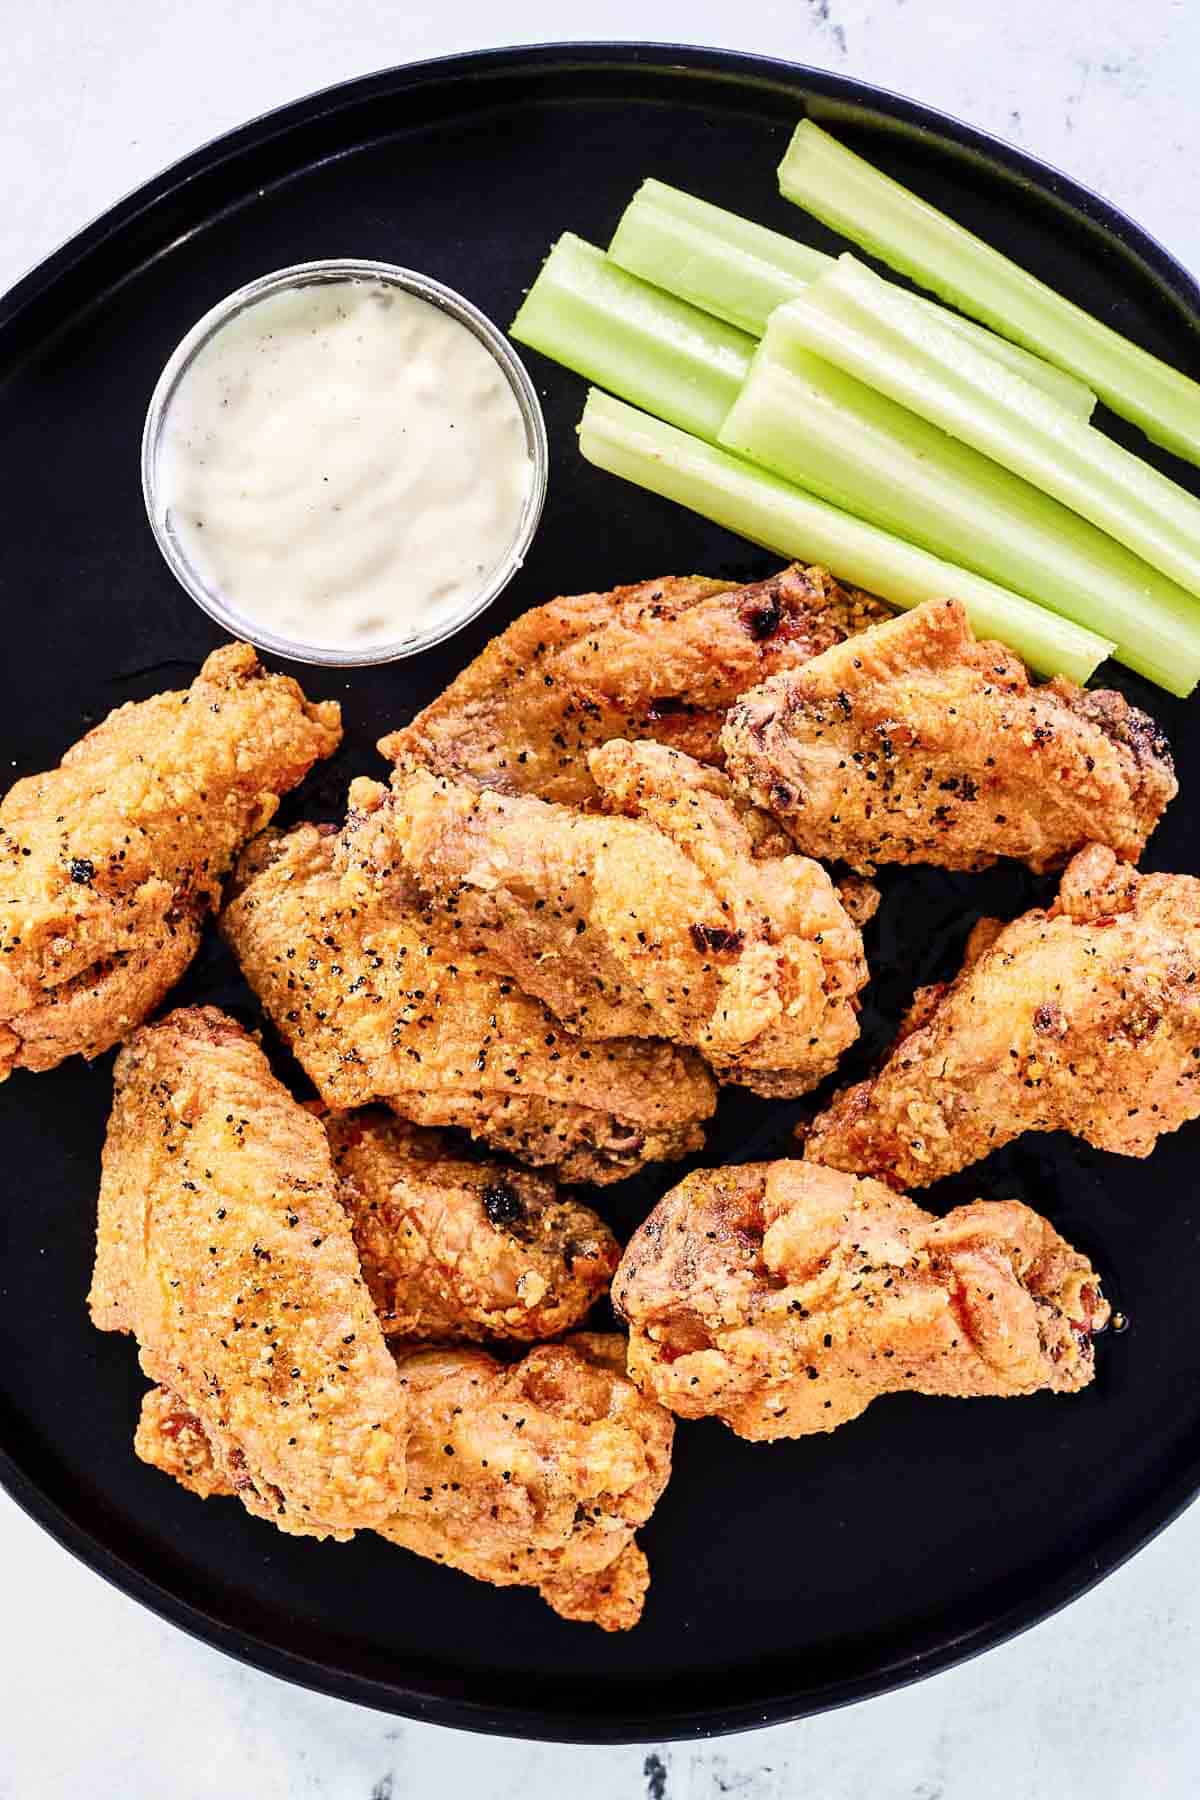 Breaded lemon pepper wings, celery sticks, and dipping sauce on a plate.